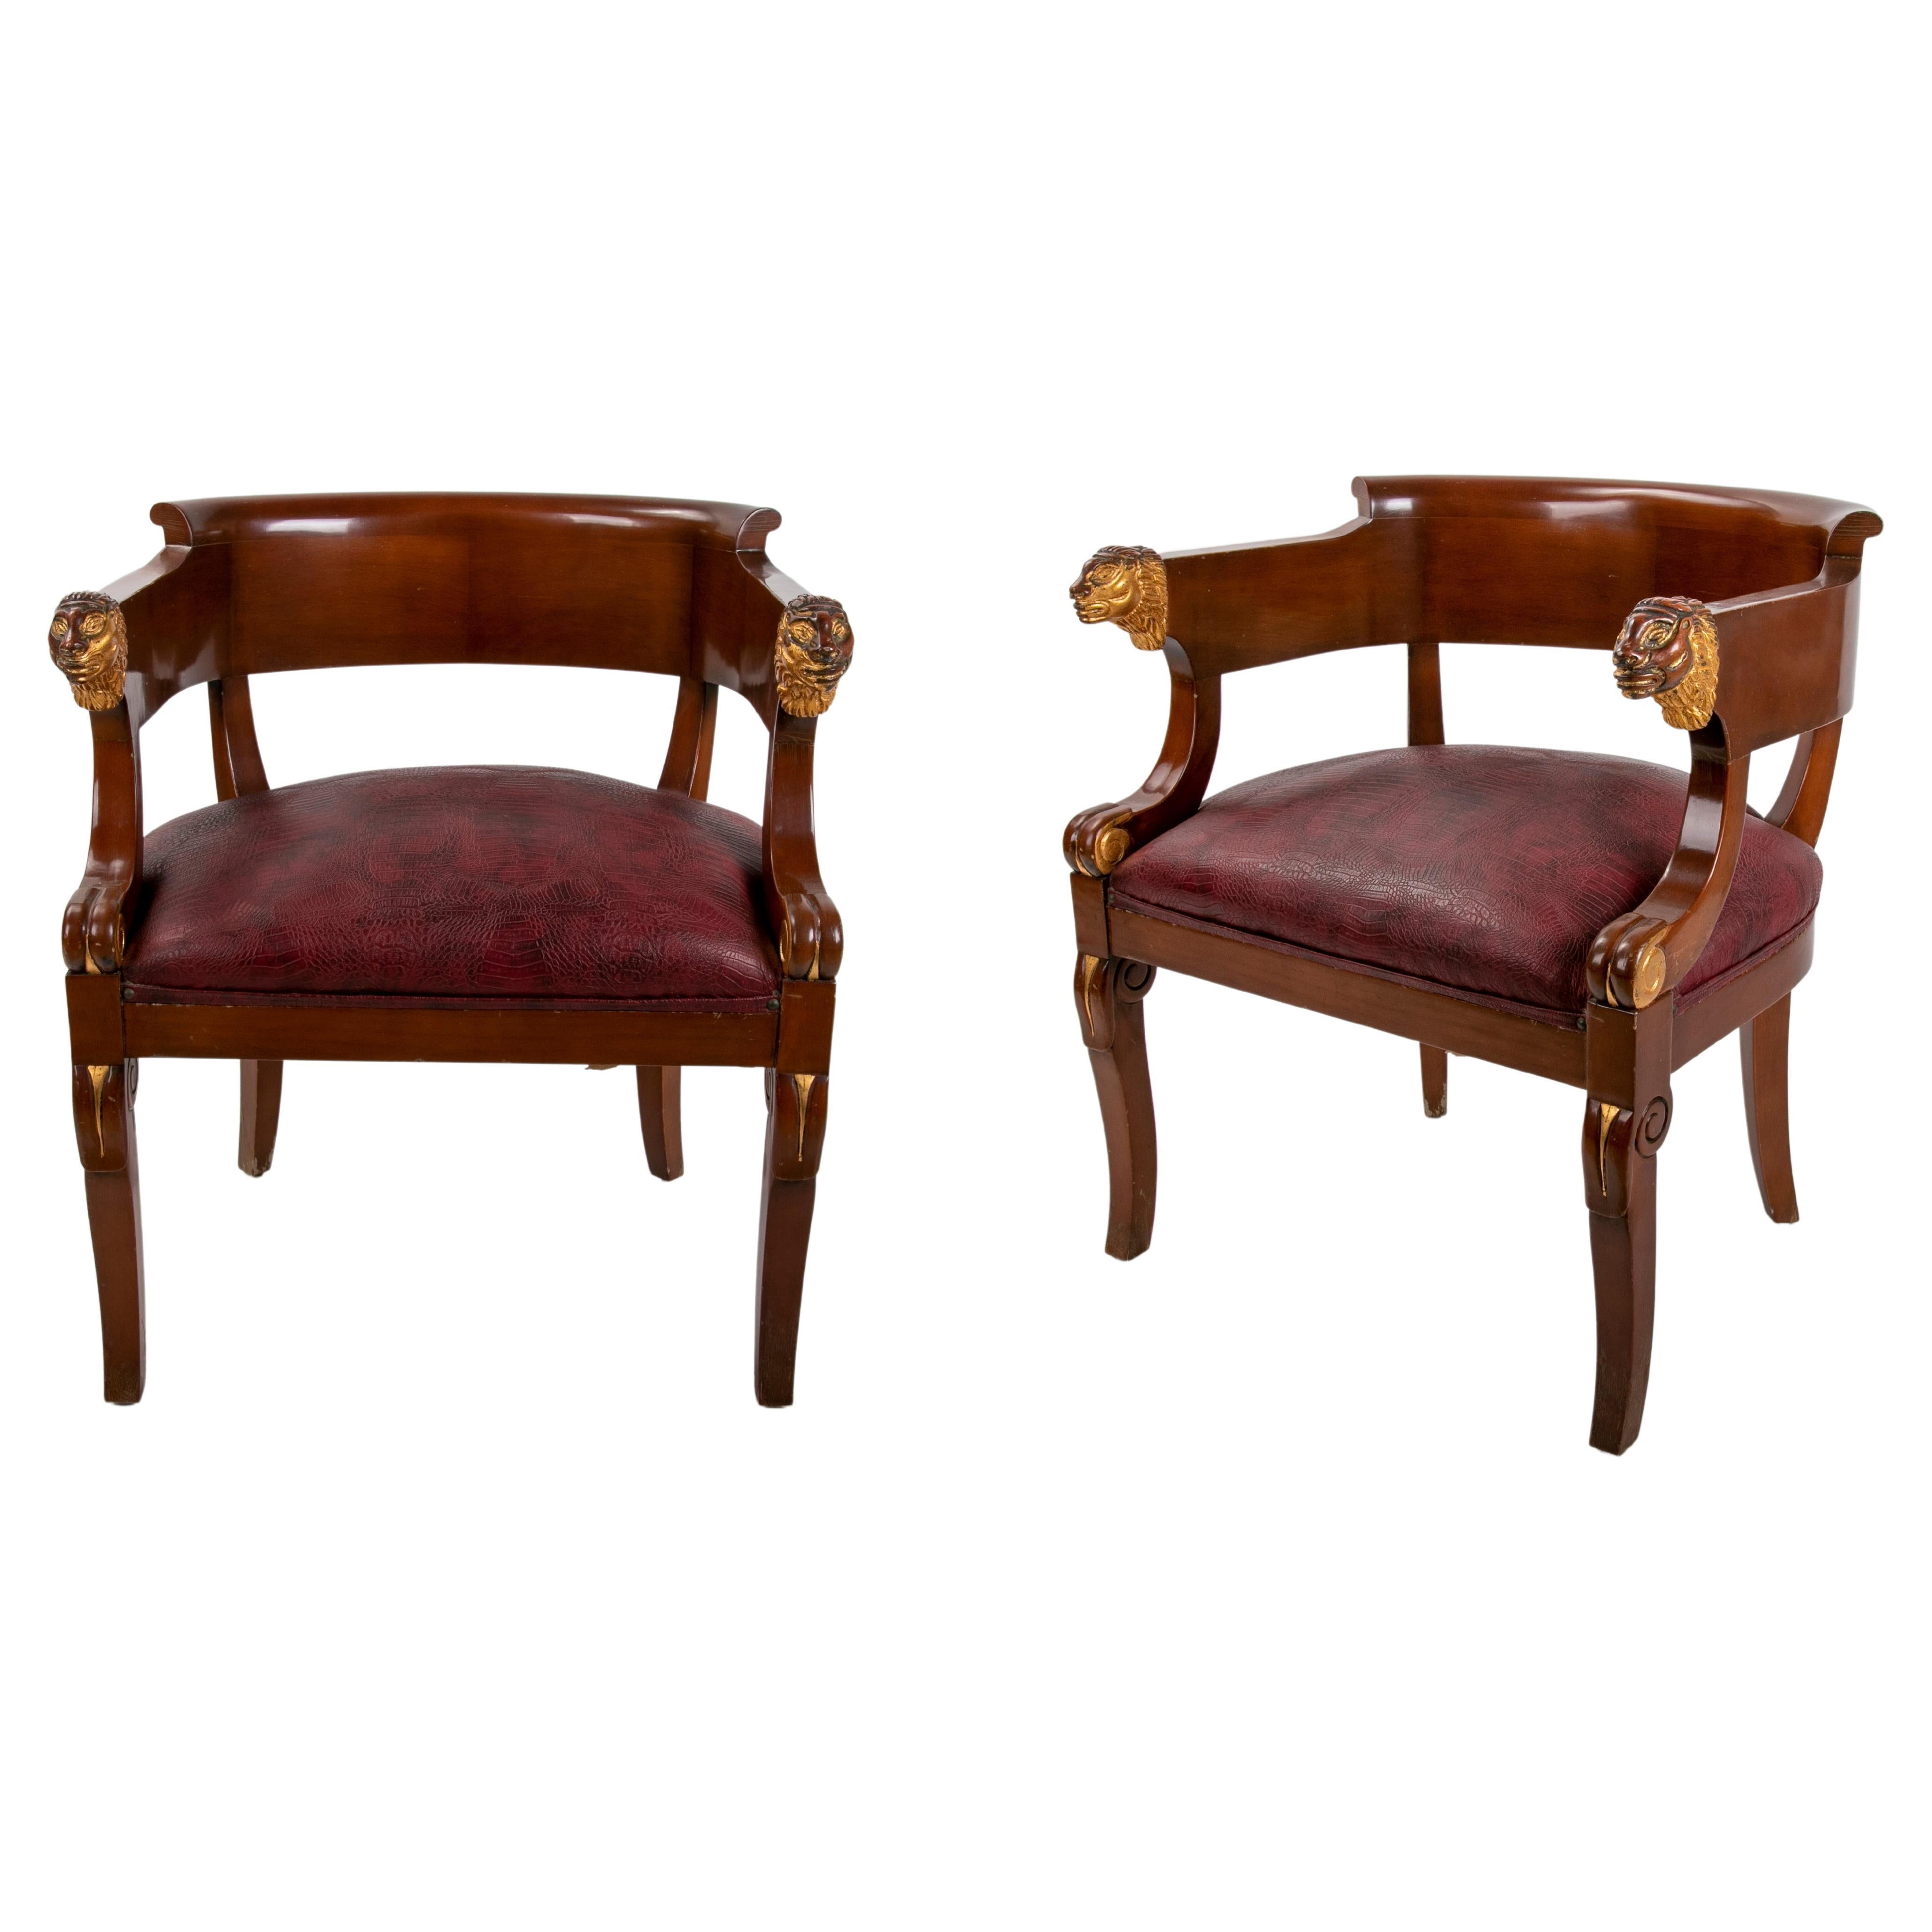 Pair of Wooden Armchairs with Lions on the Armrests For Sale